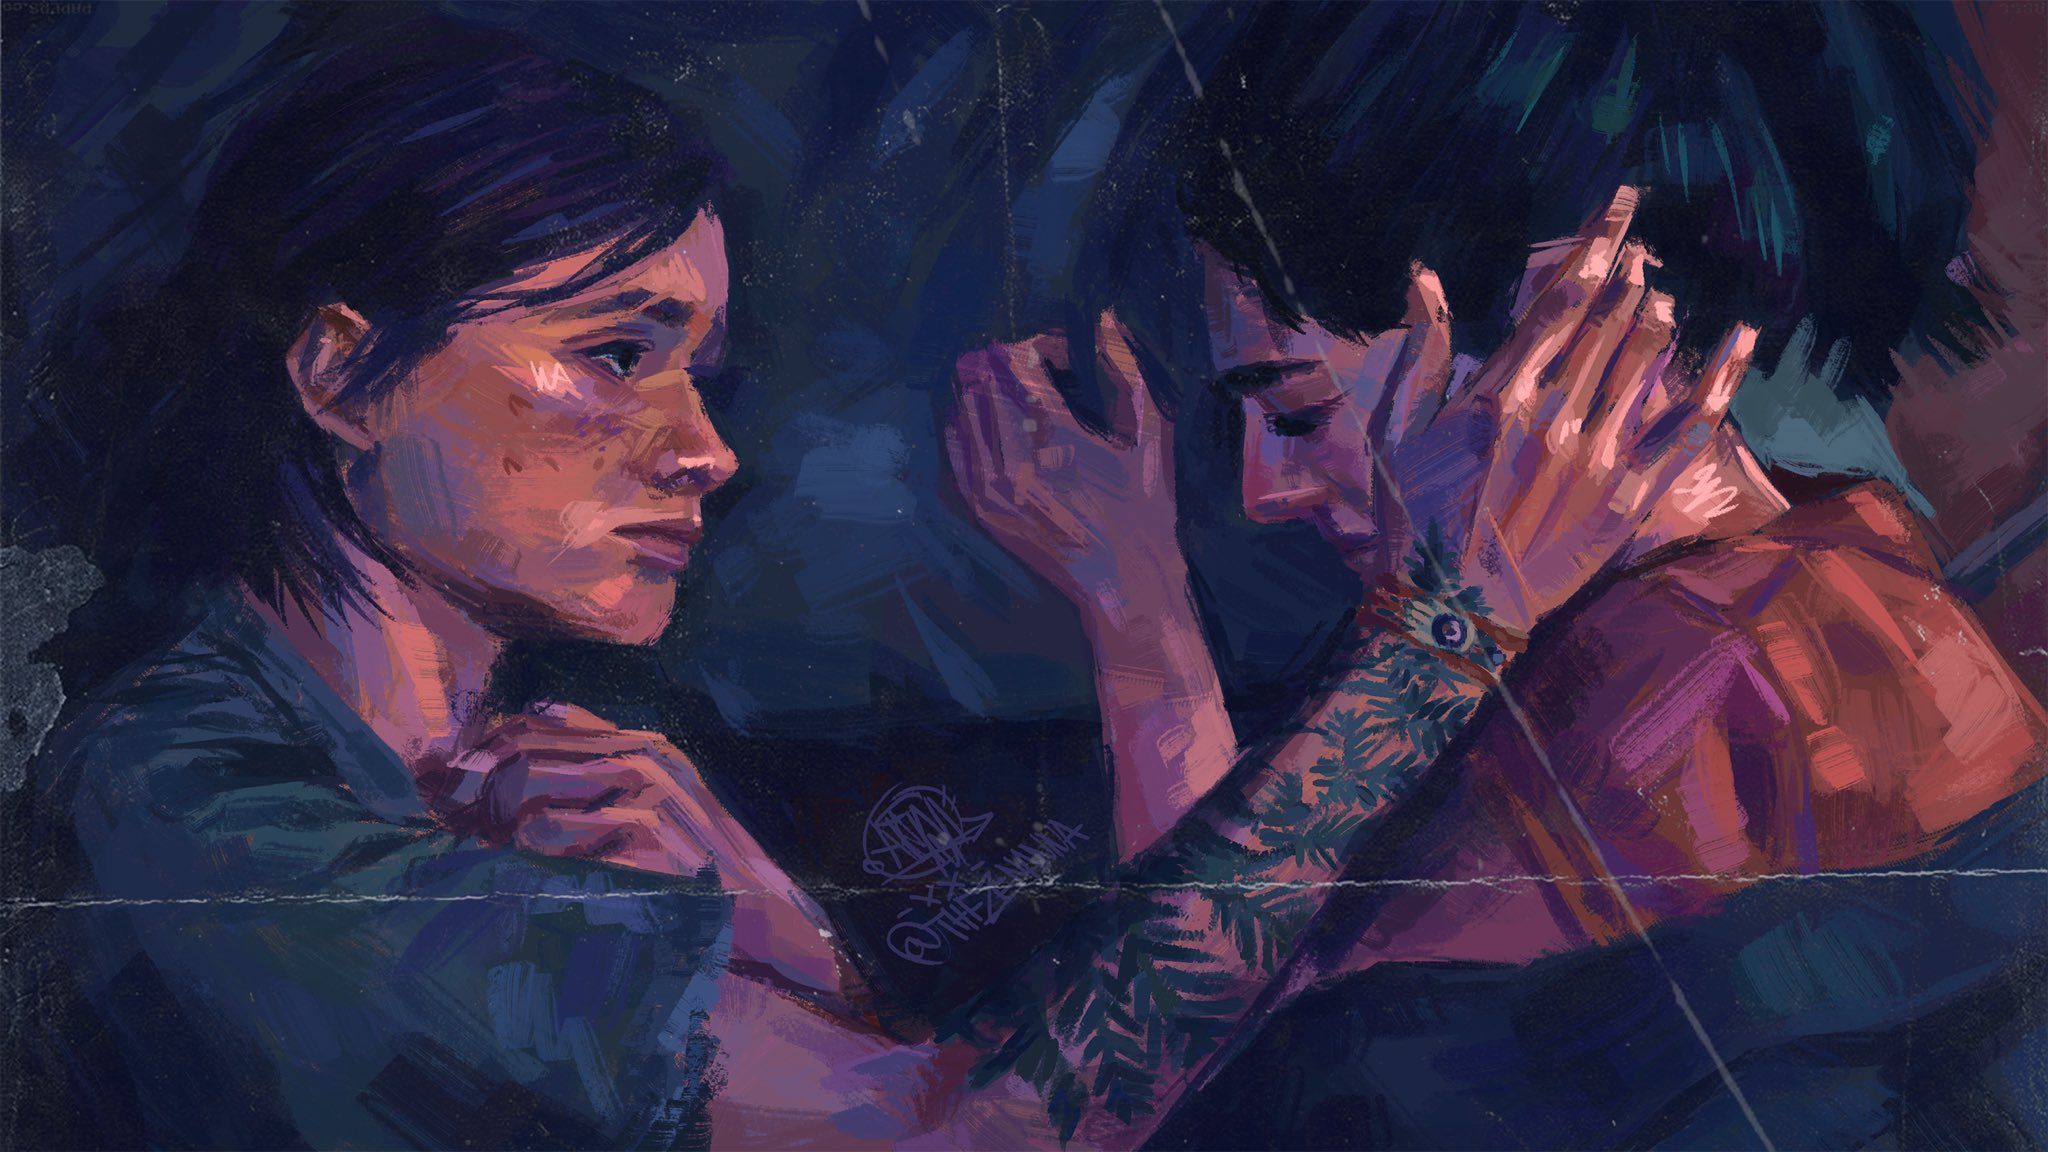 The Last of Us Part II's Ellie and Dina Beautifully Captured in Emotional Fan Art